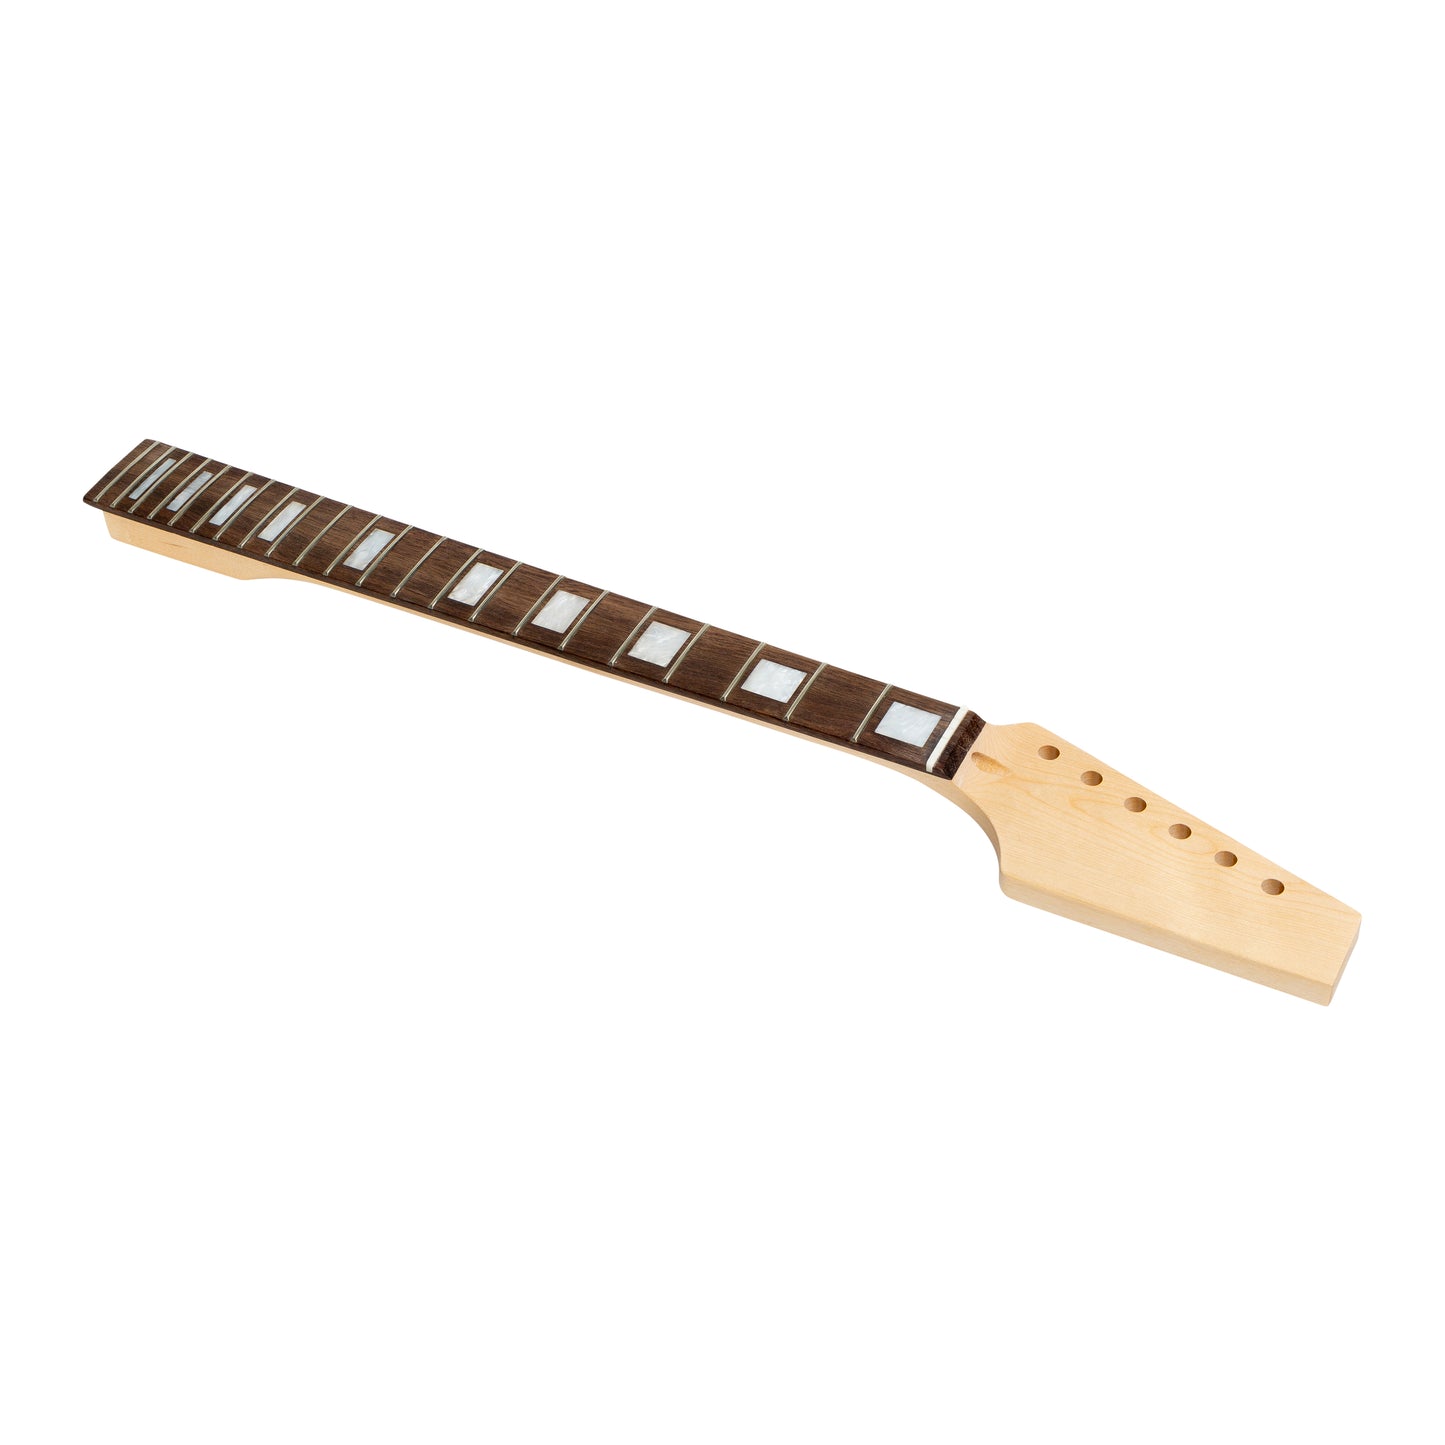 AE Guitars® T-Style Guitar Neck 22 Frets Rosewood Block Inlay